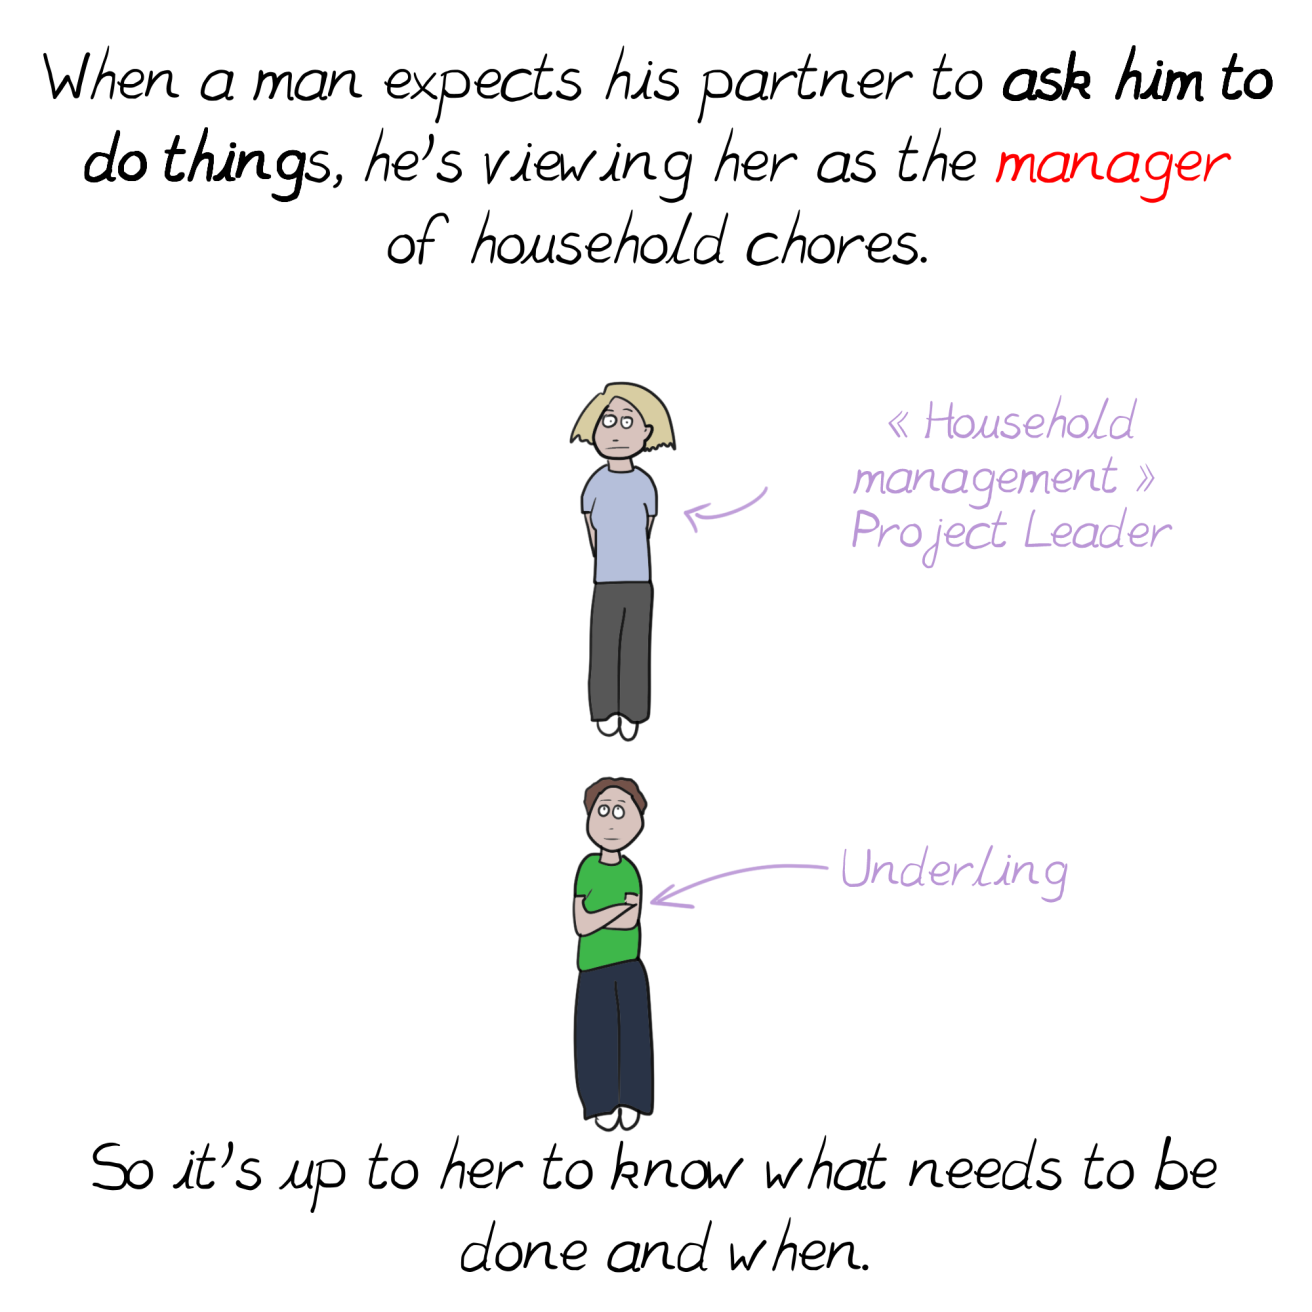 Expect asking. Underling. Gender Wars of household Chores перевод. The Gender thing. Asking for things and Replying.